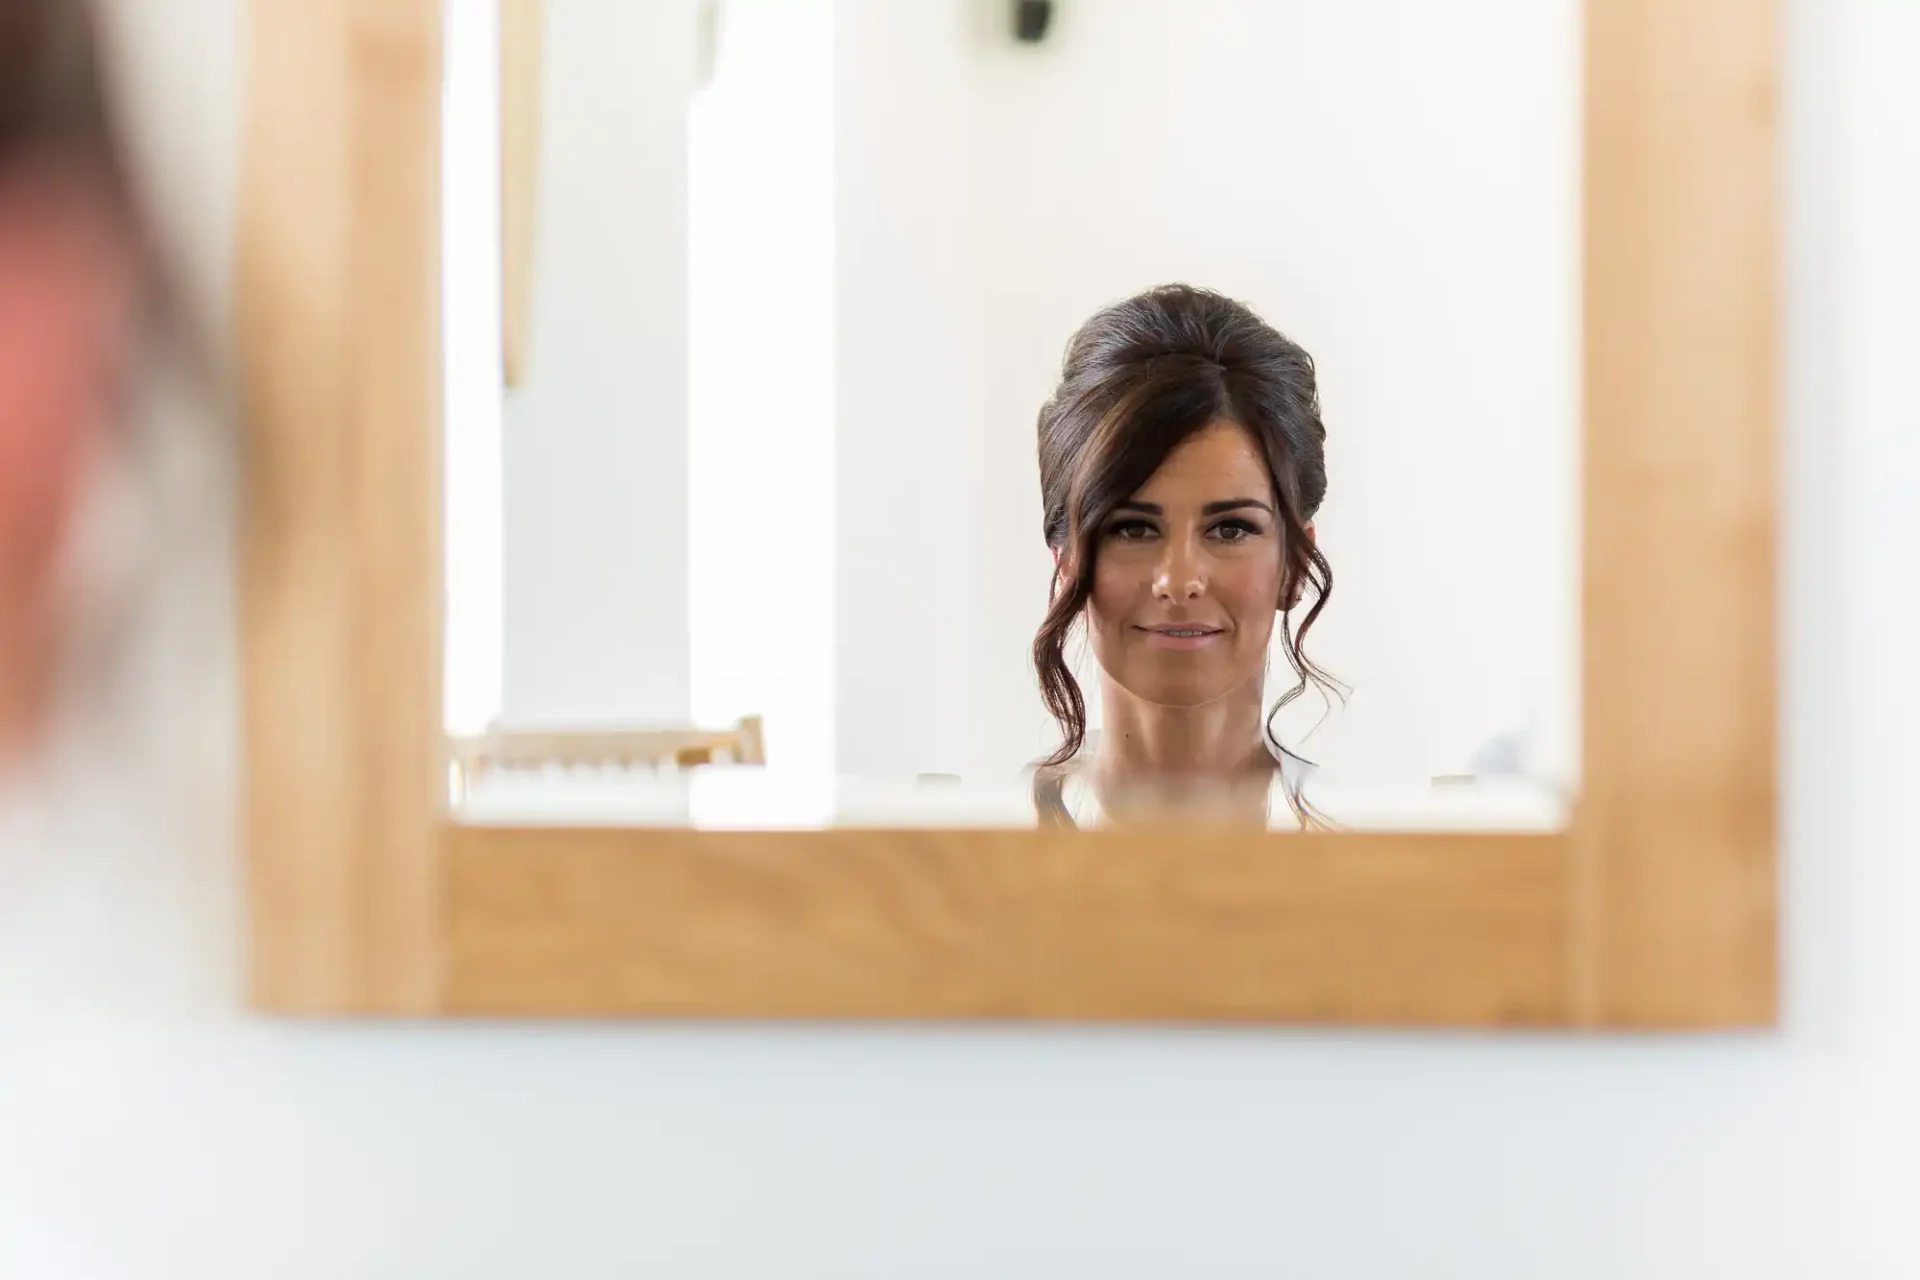 Woman with an updo hairstyle smiling gently, reflecting in a frameless mirror in a bright room.